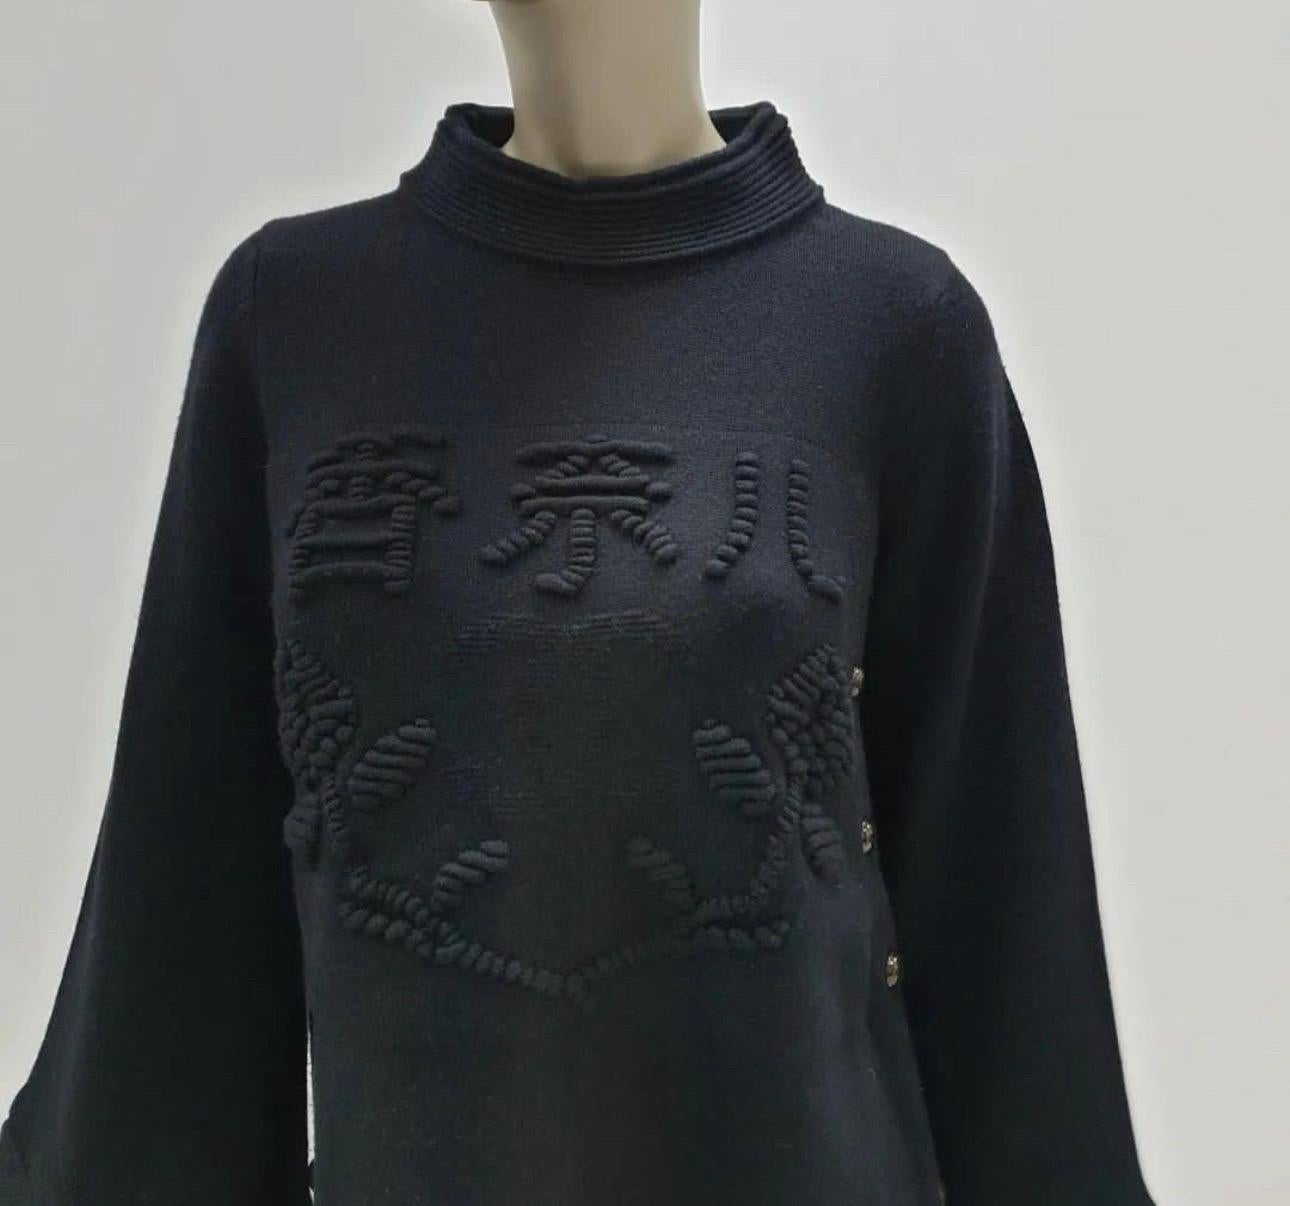 CHANEL black cashmere sweater tunic dress featuring large CC logo, CHANEL in Chinese characters and camellia at center front, bell shape sleeves, CC logo buttons adorn on both sides of dress.

Sz.36

Wool, cashmere and leather parts.

Very good